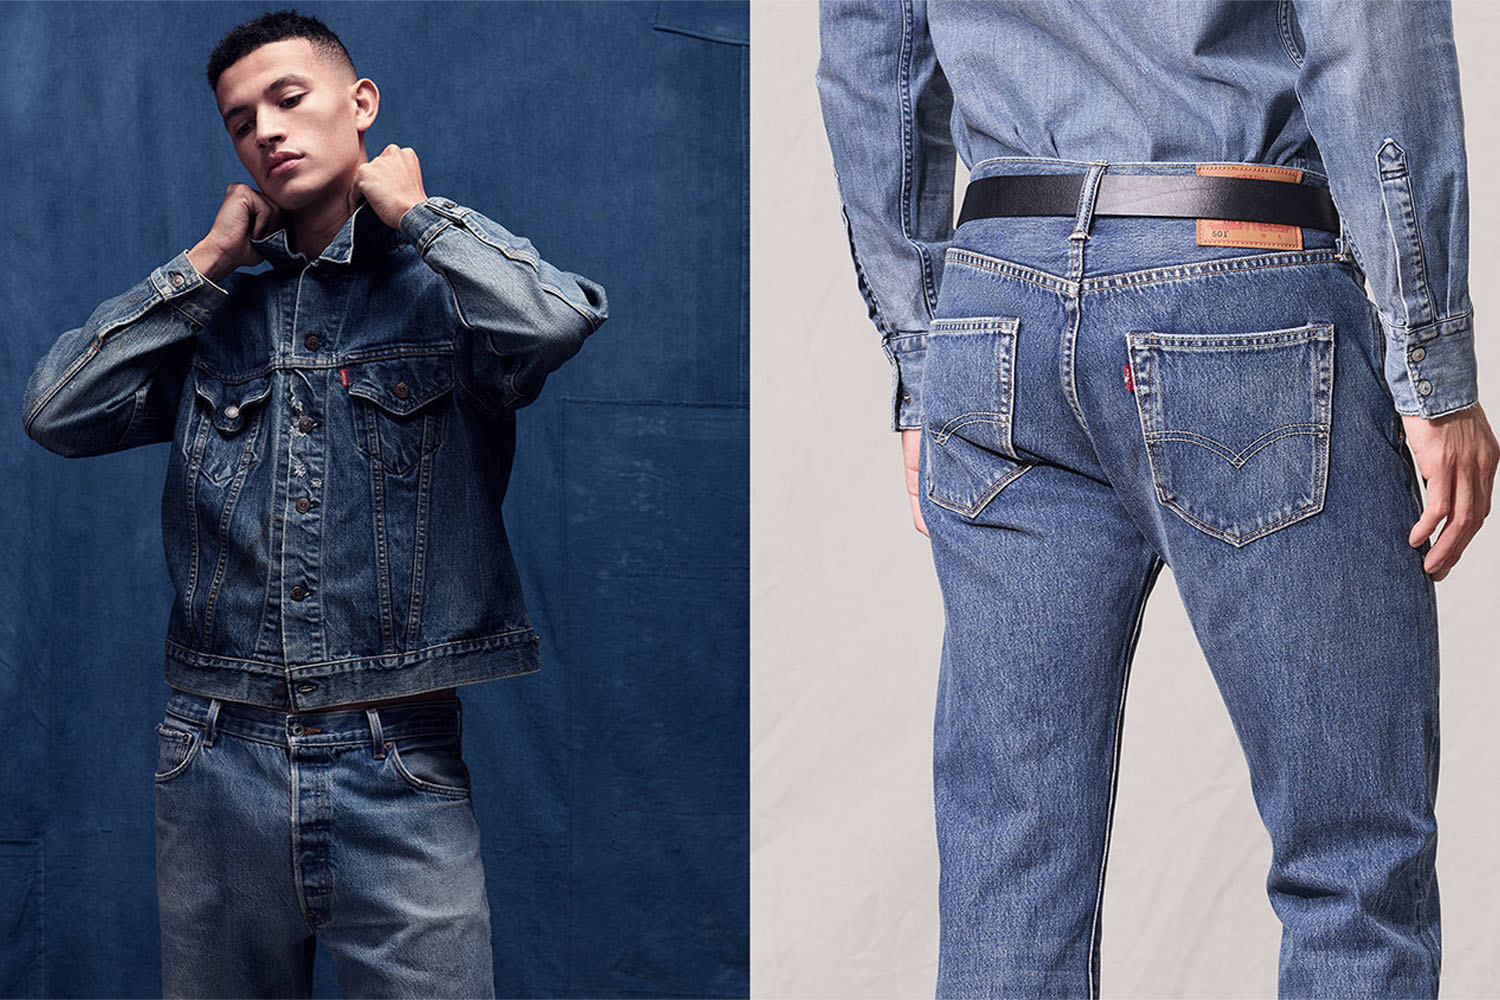 two model shots of a Levi's outfit